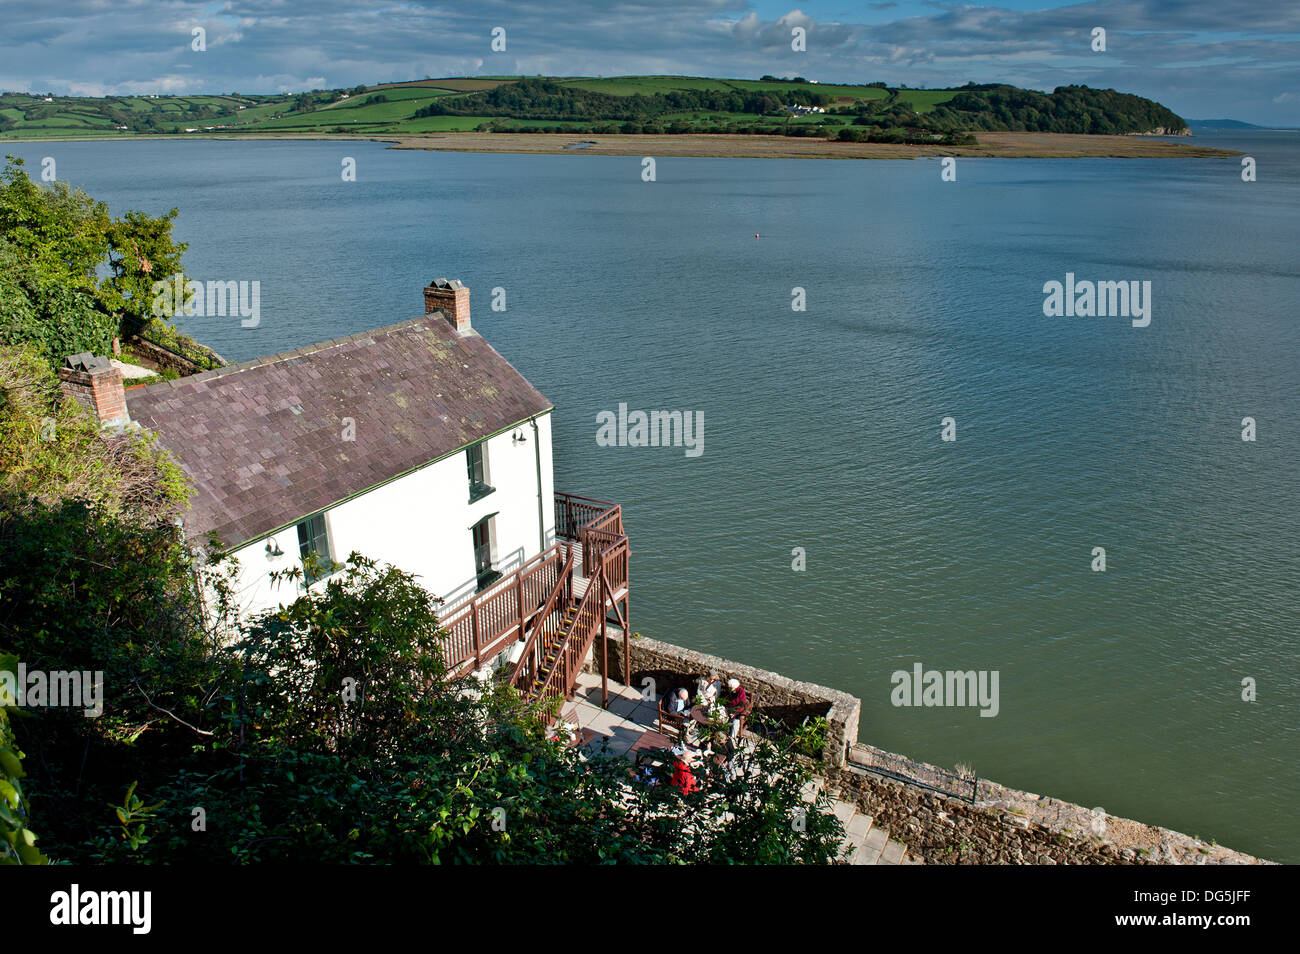 View of Dylan Thomas' Boathouse in the town of Laugharne, the Birthplace of the Poet Dylan Thomas, Wales UK Stock Photo